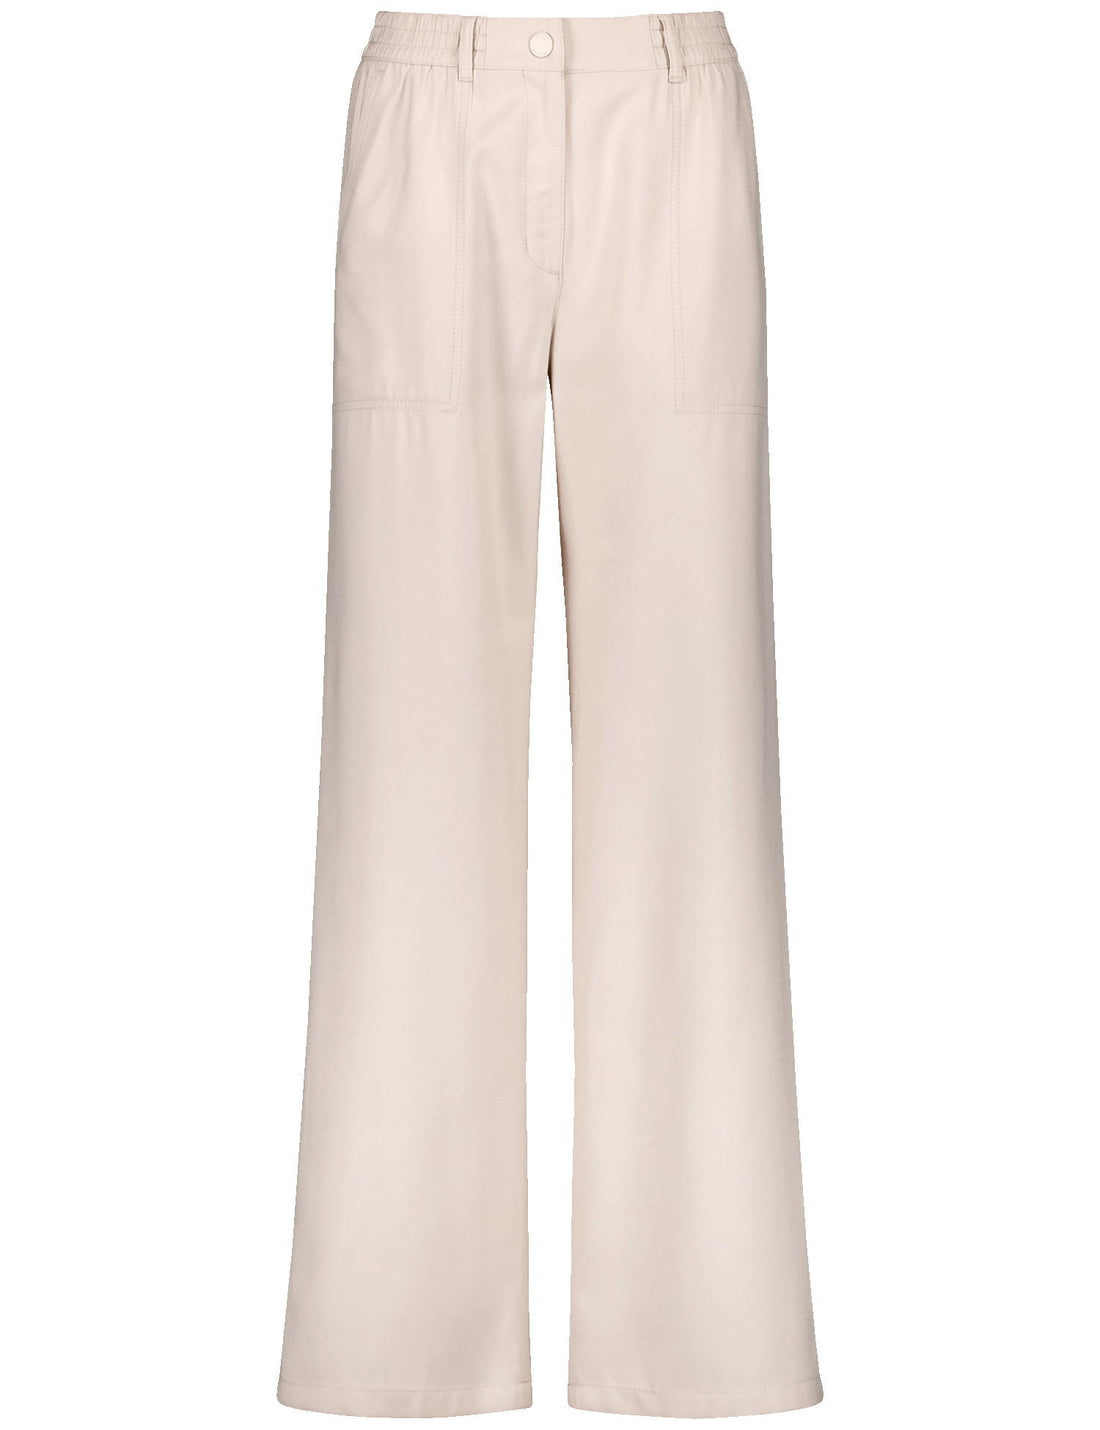 Comfortable Wide-Leg Trousers_320013-31331_90138_02